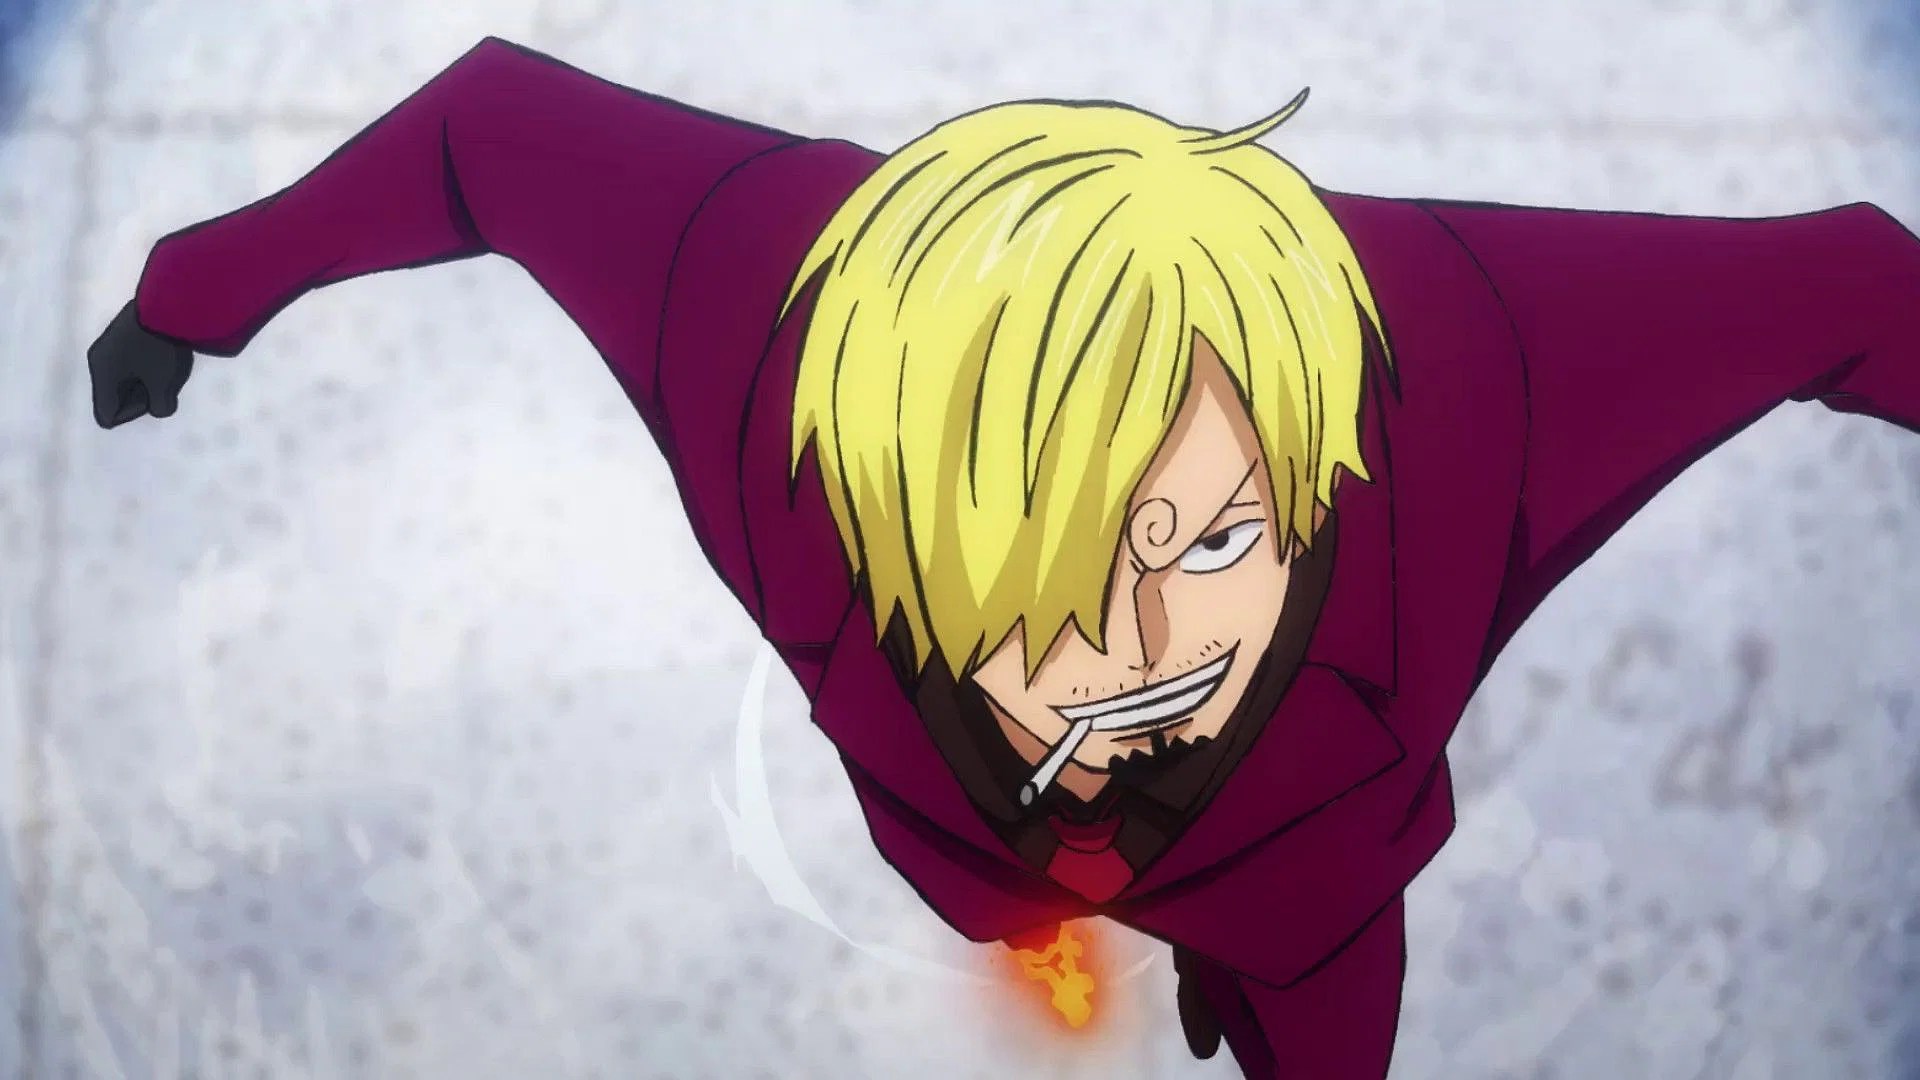 'One Piece': Sanji's Hell Memories Technique, Explained | The Mary Sue